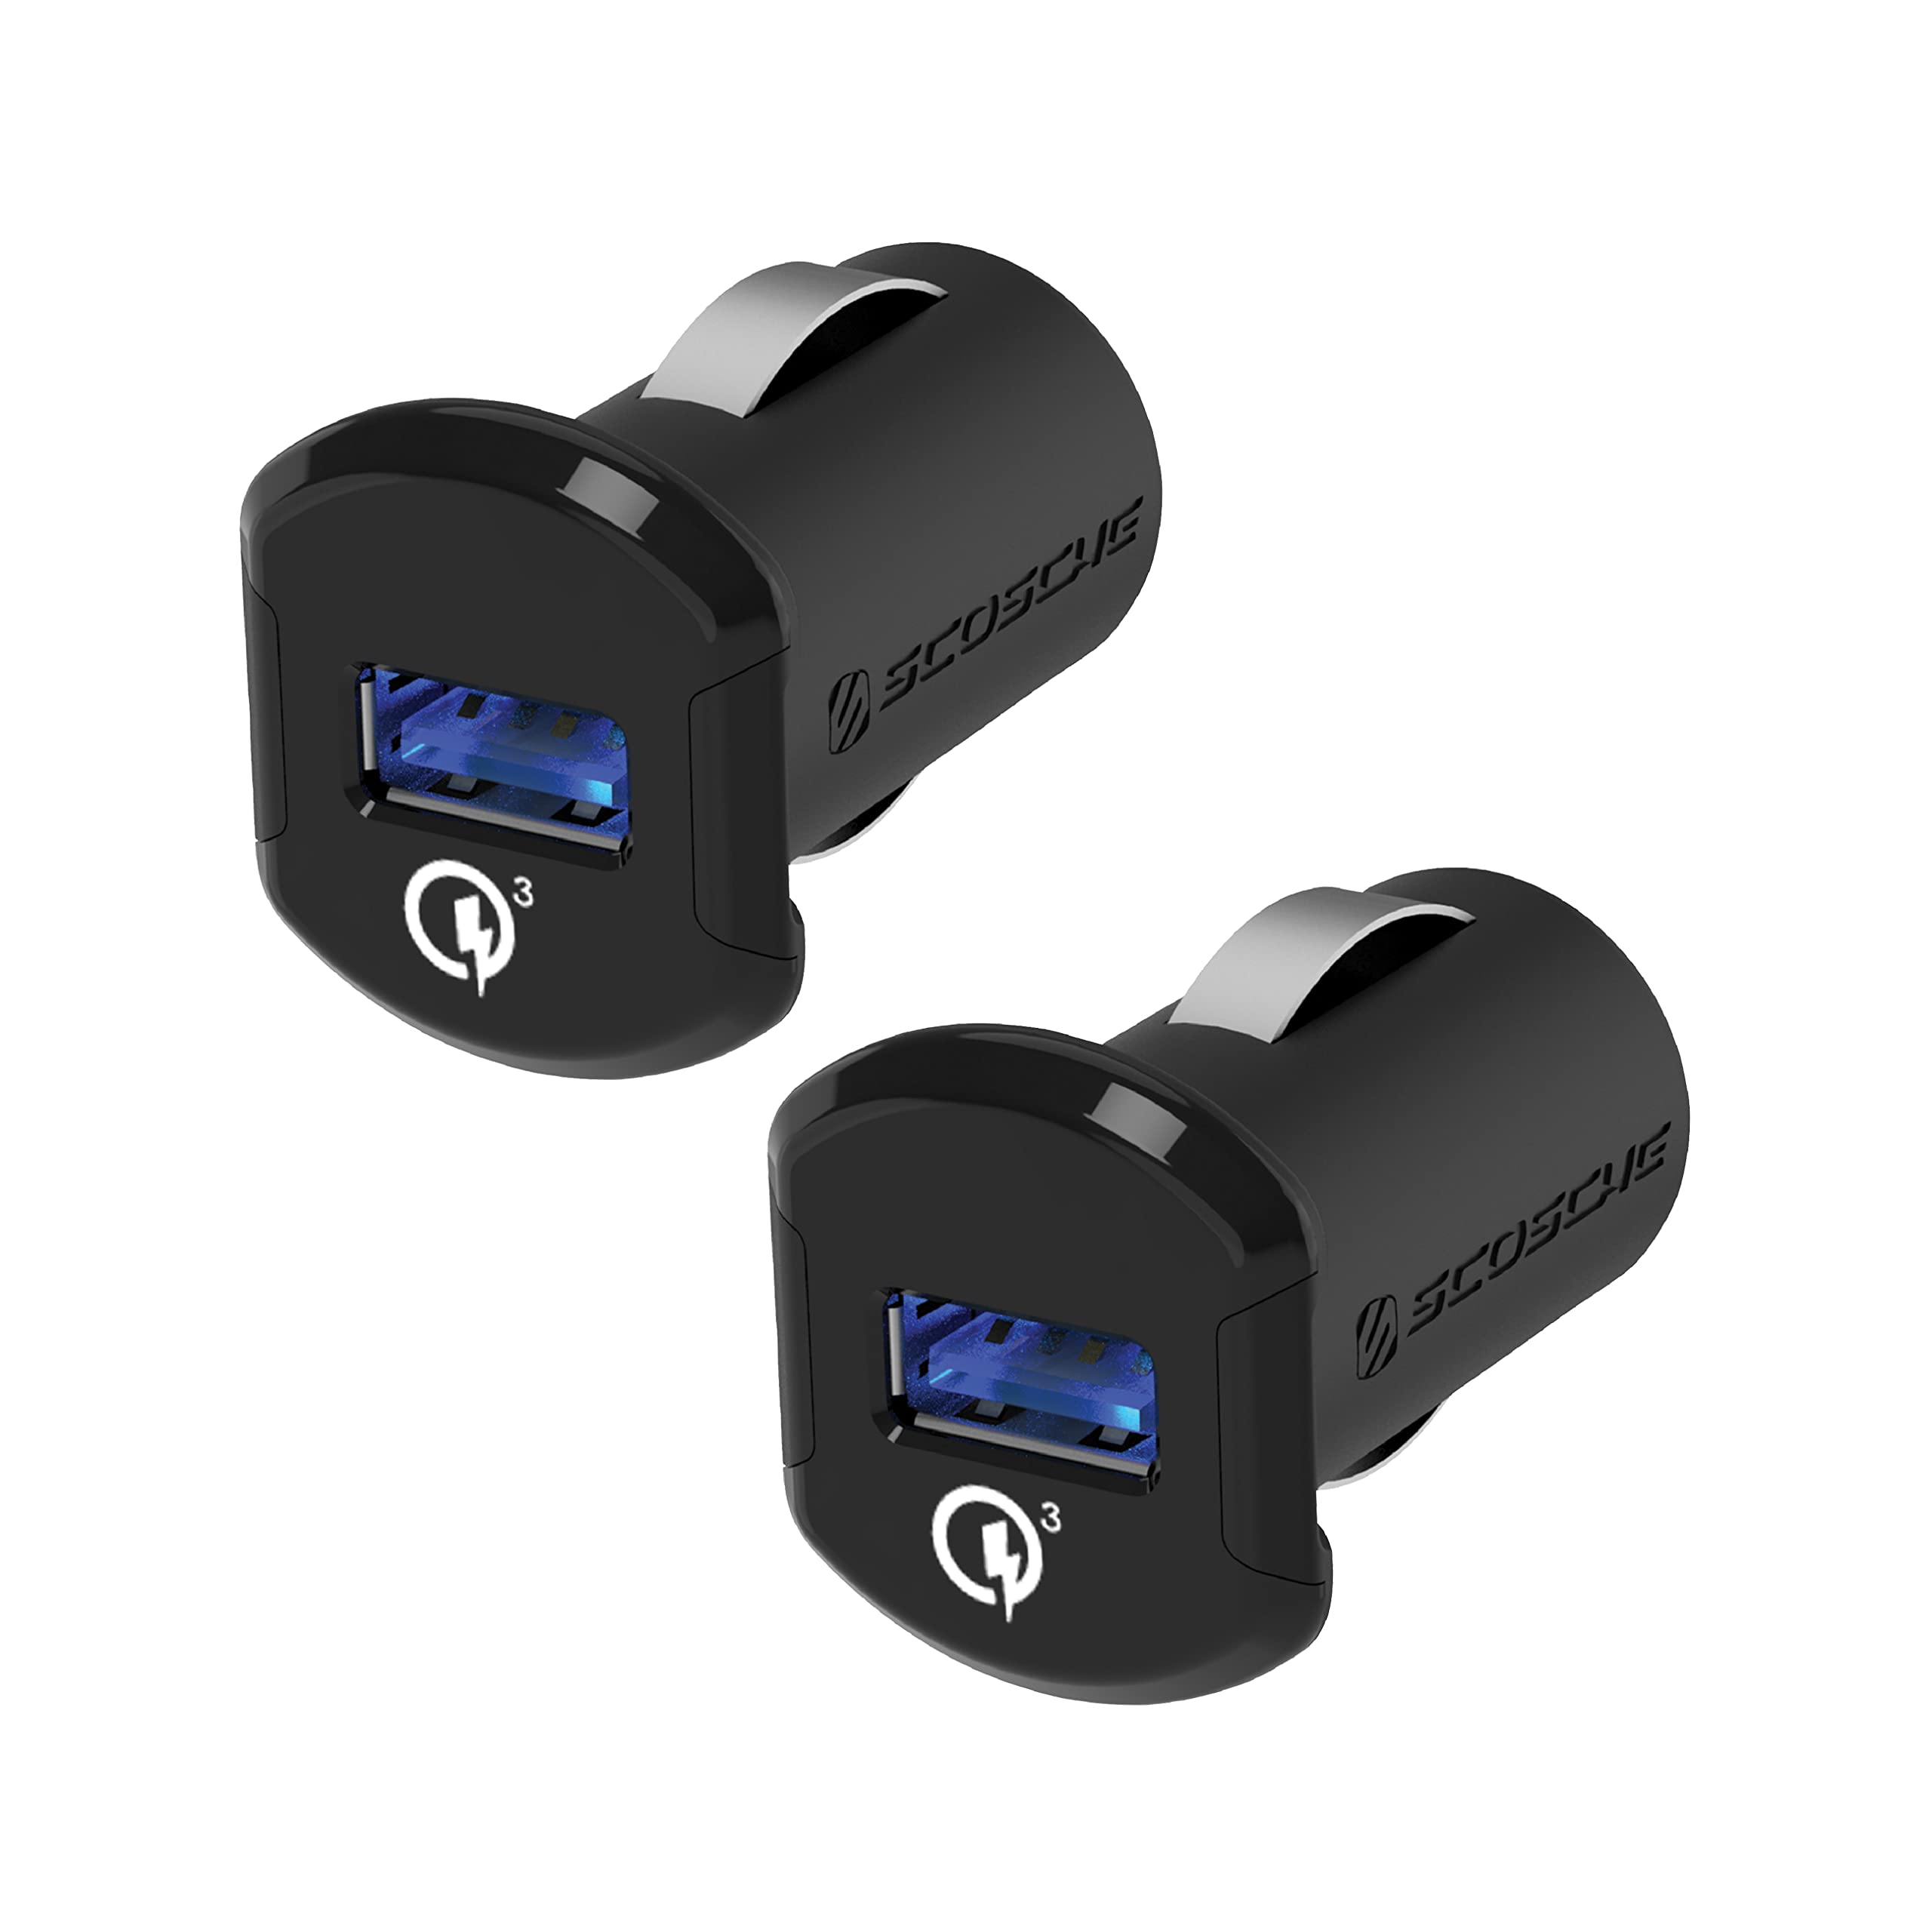 Scosche USBCQC1 18W Qualcomm Quick Charge 3.0 Car Charger Compatible with All Qualcomm 3.0, 2.0, Samsung Adaptive Fast Charge and USB Devices (Pack of 2)